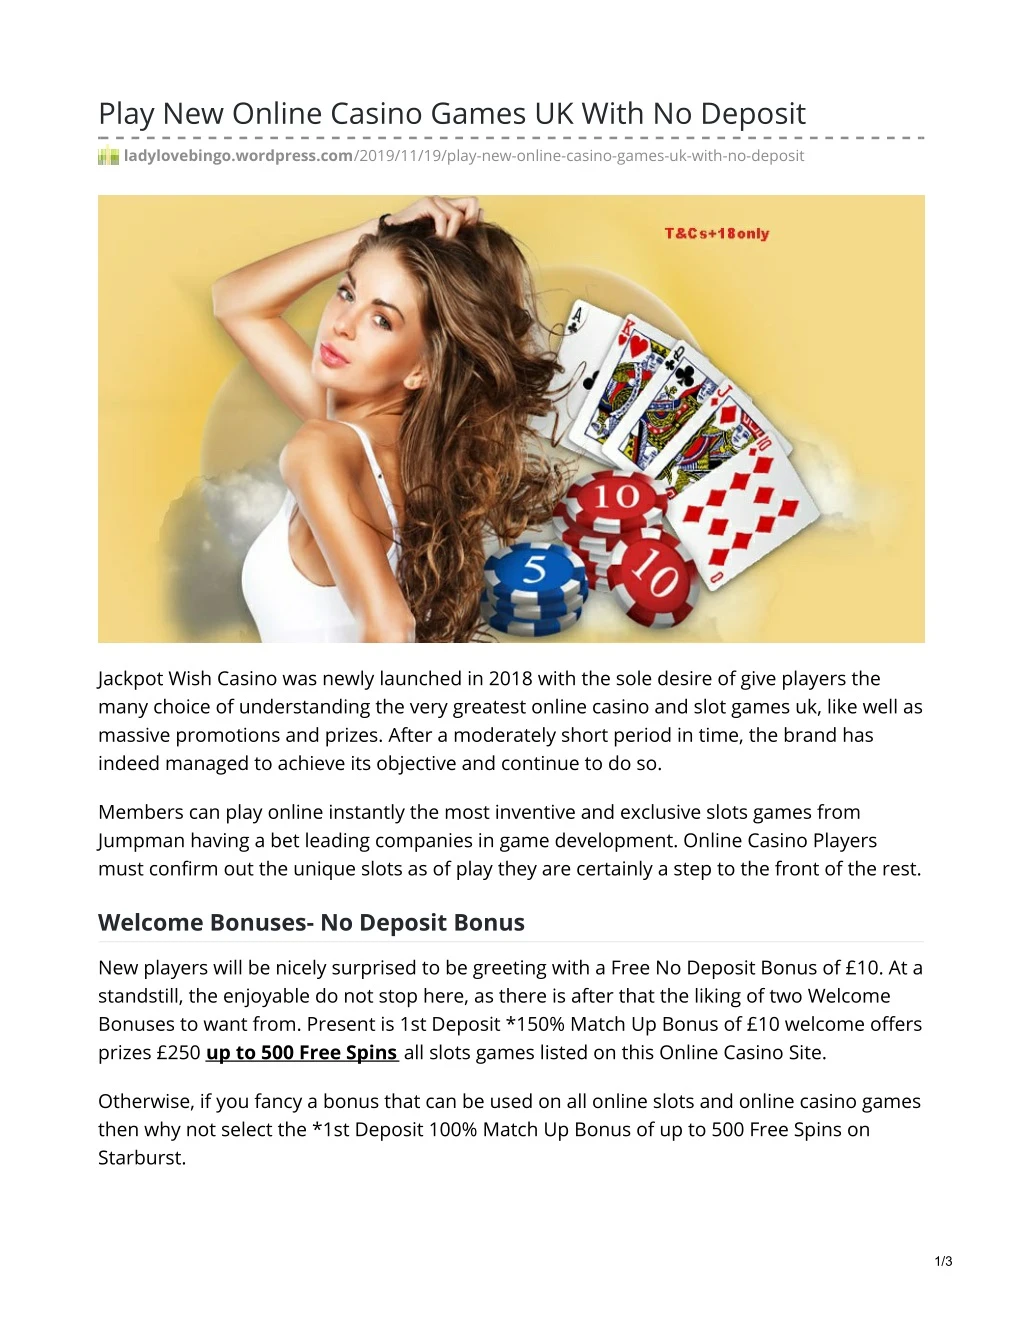 play new online casino games uk with no deposit